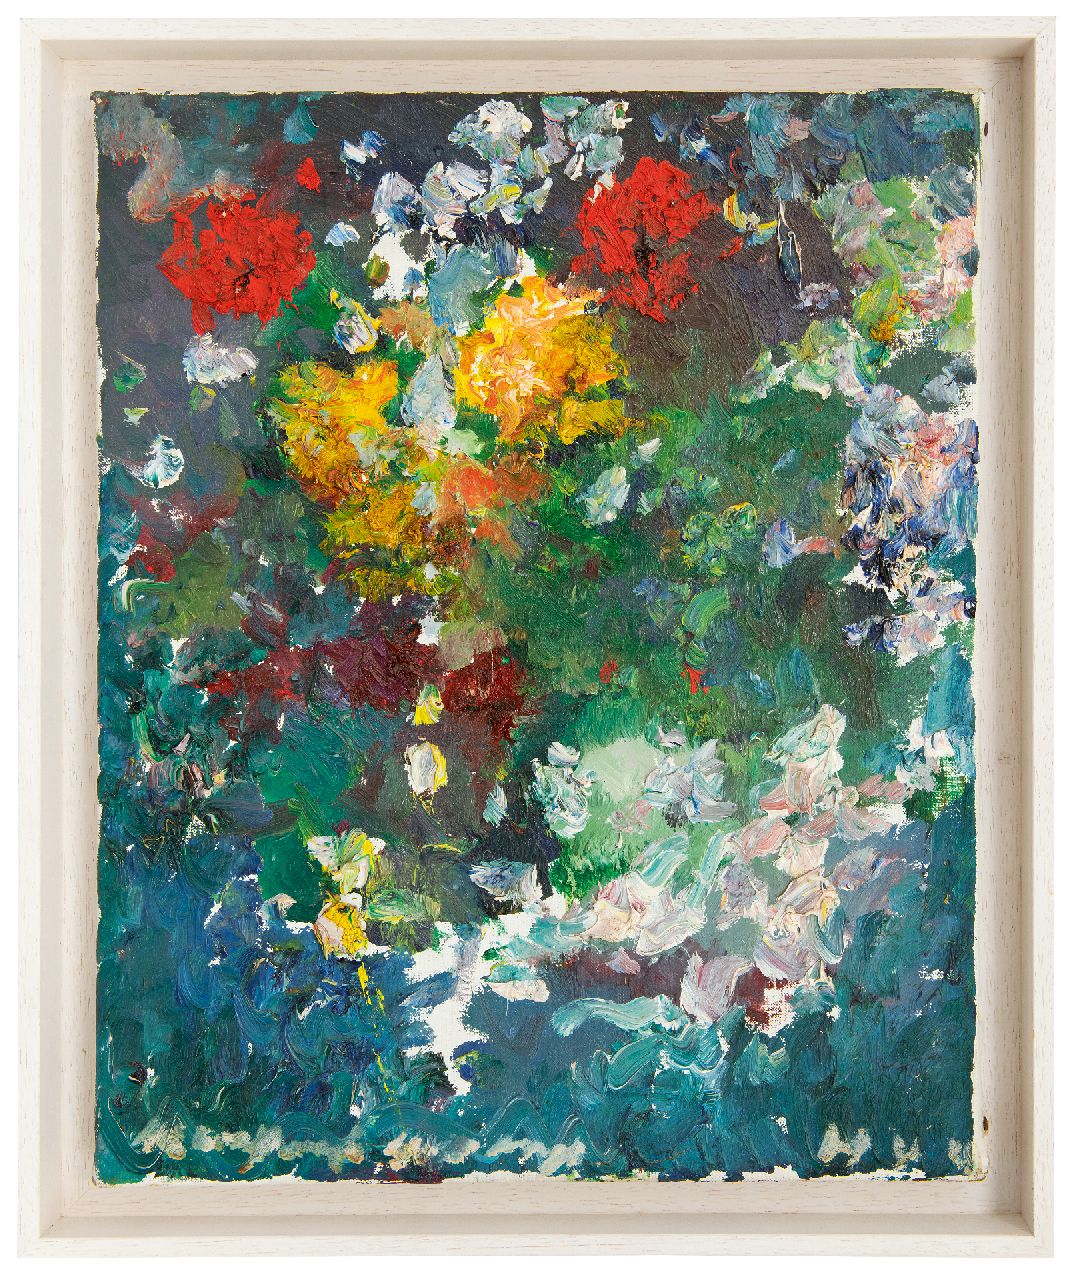 Verwey K.  | Kees Verwey | Paintings offered for sale | Flowers, oil on canvas 50.0 x 39.7 cm, signed l.l. and on the reverse and verso dated '83